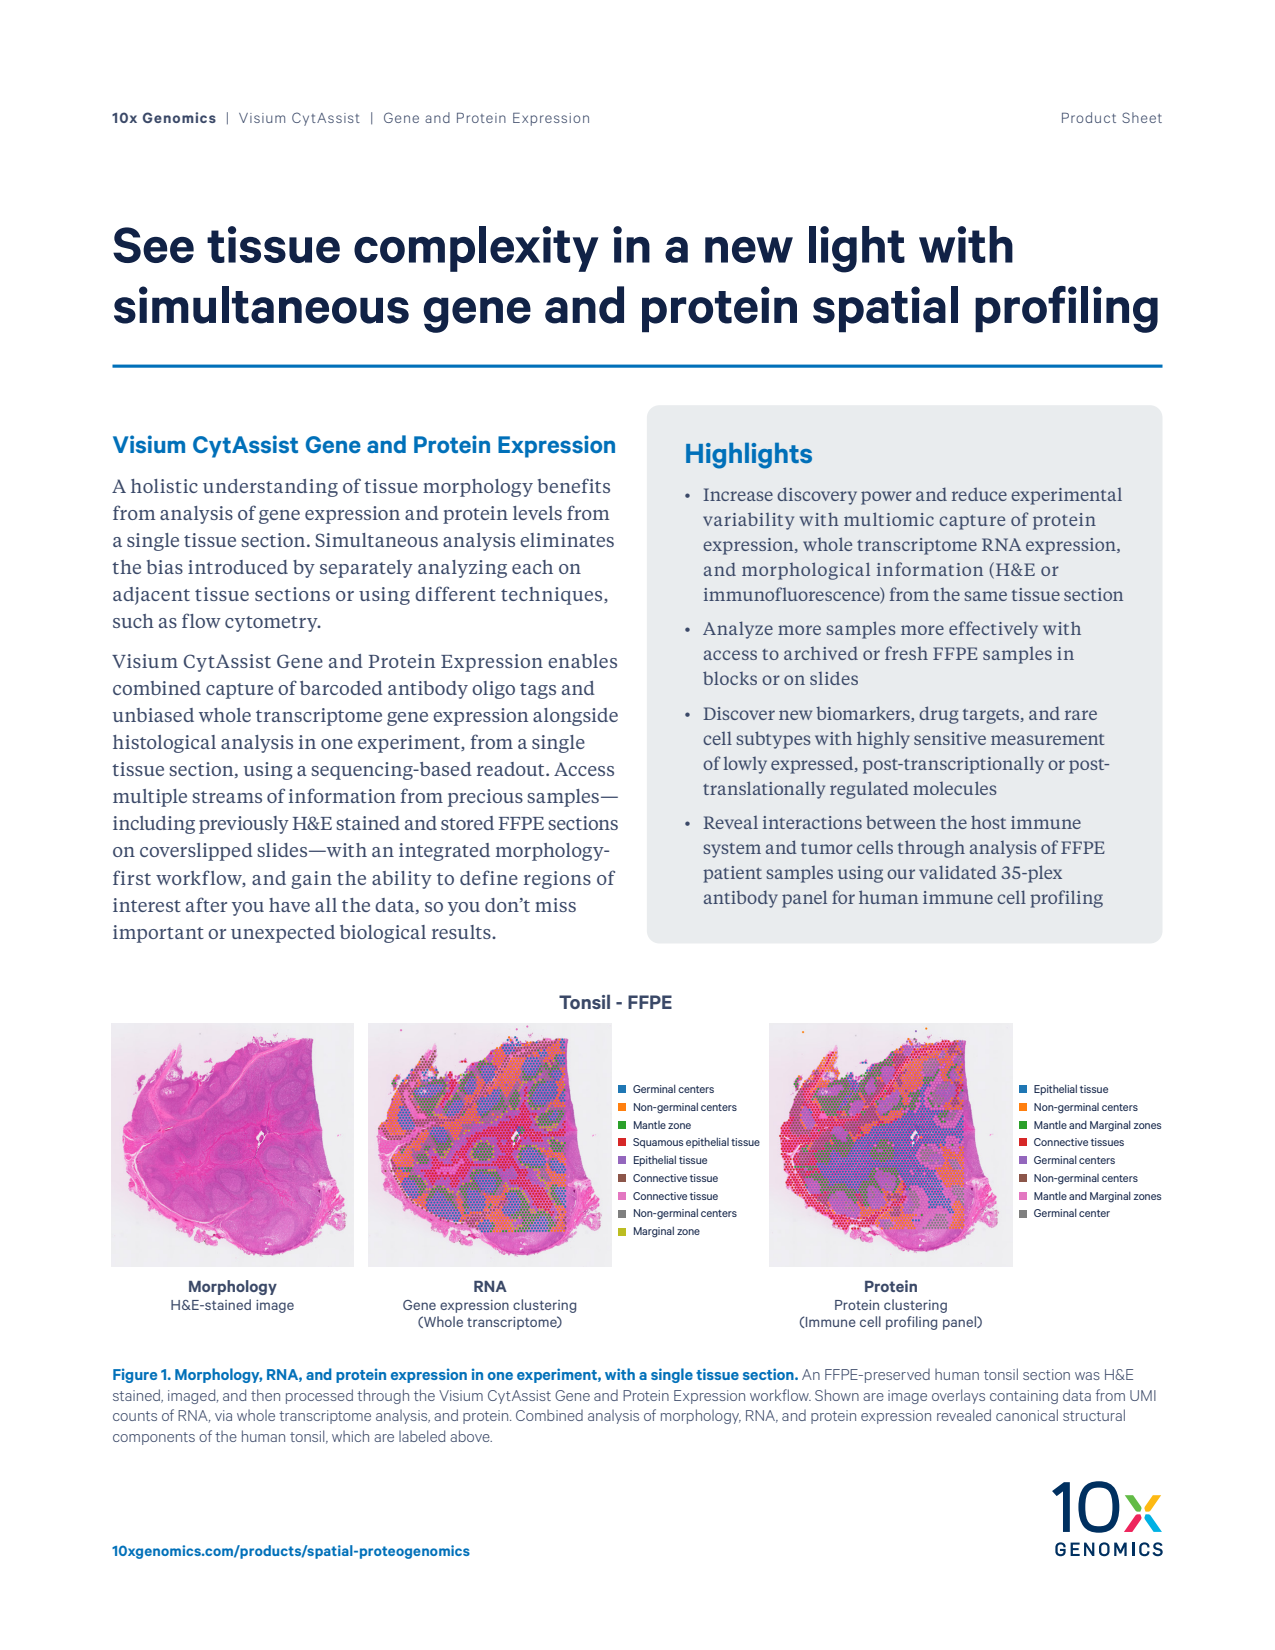 See tissue complexity in a new light with simultaneous gene and protein spatial profiling